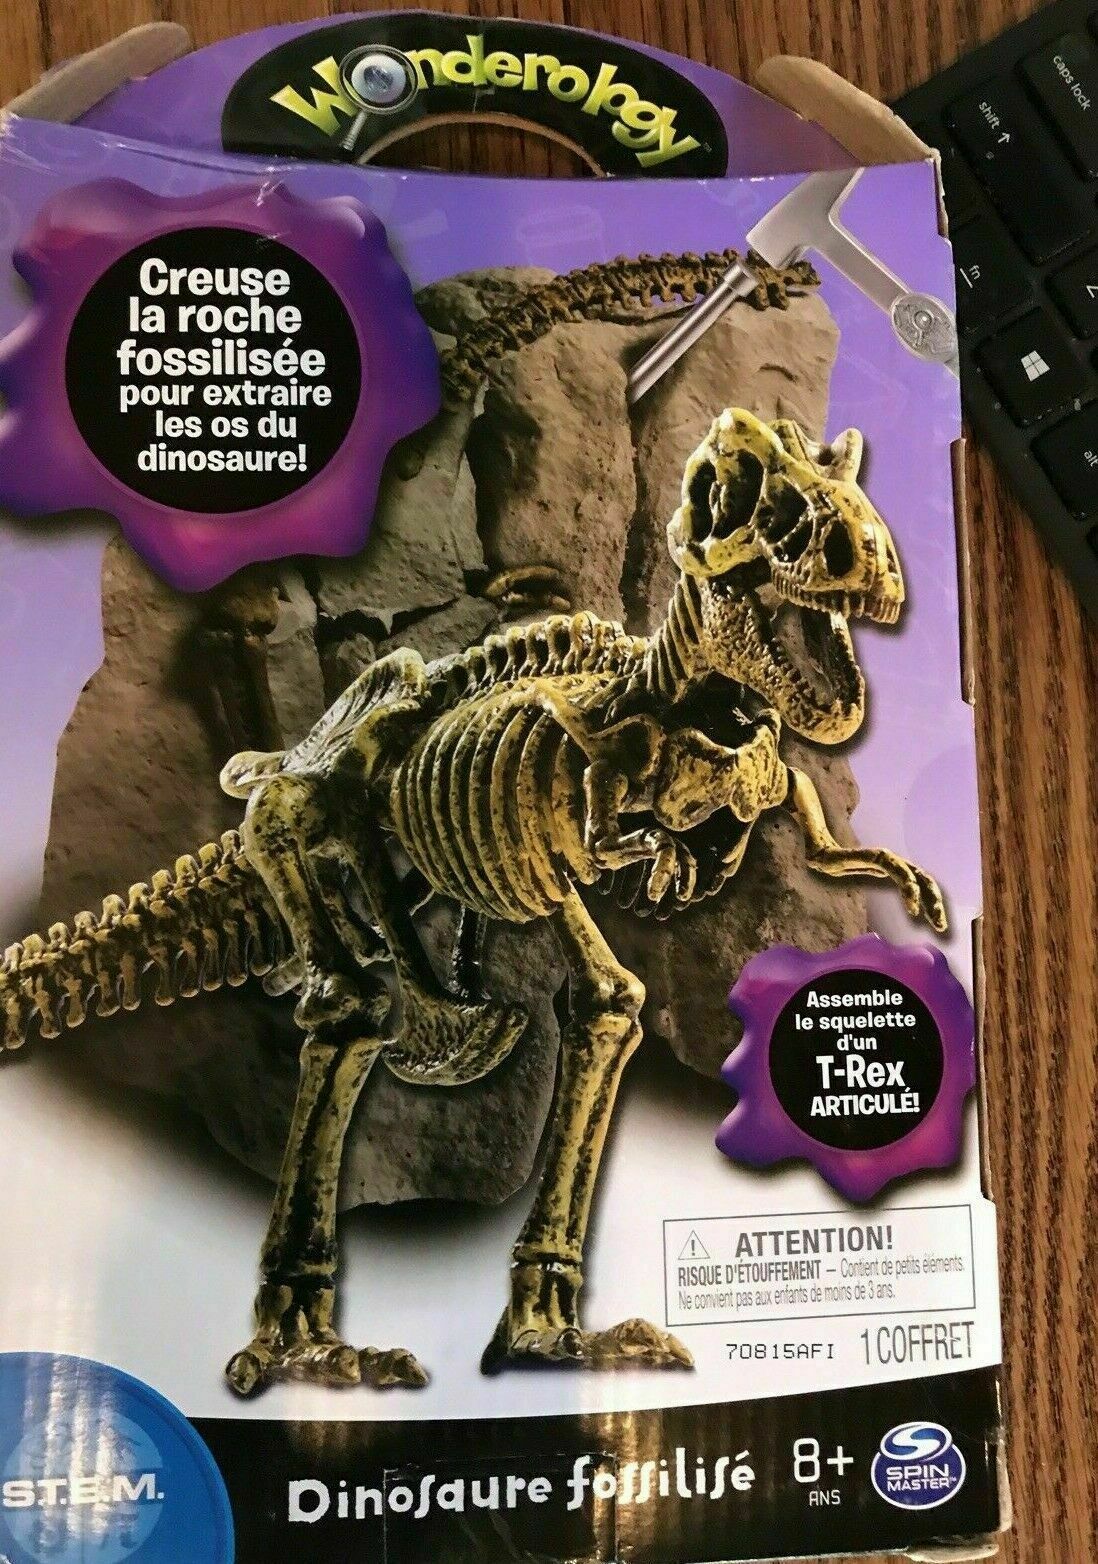 Wonderology Fossil Discoveries Poseable T-Rex NIB Realistic Dino Fossils